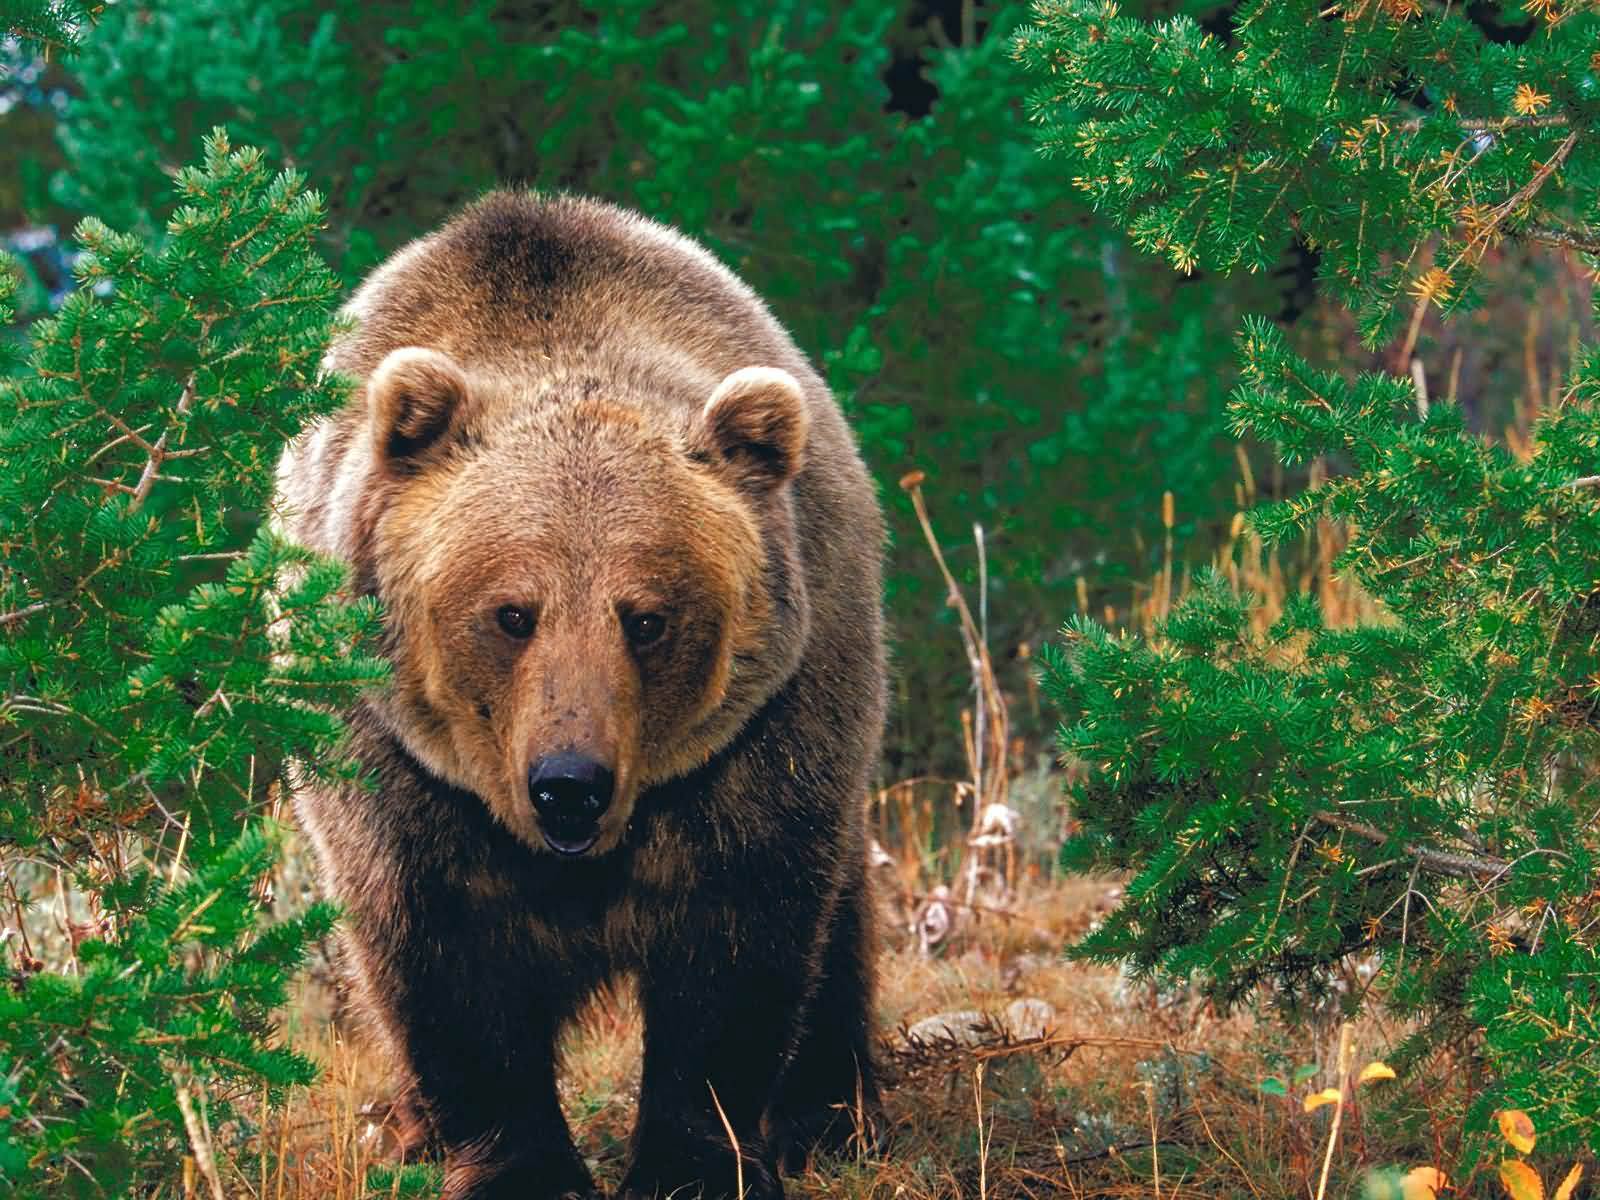 Free Grizzly Bear Wallpaper download - Animals Town